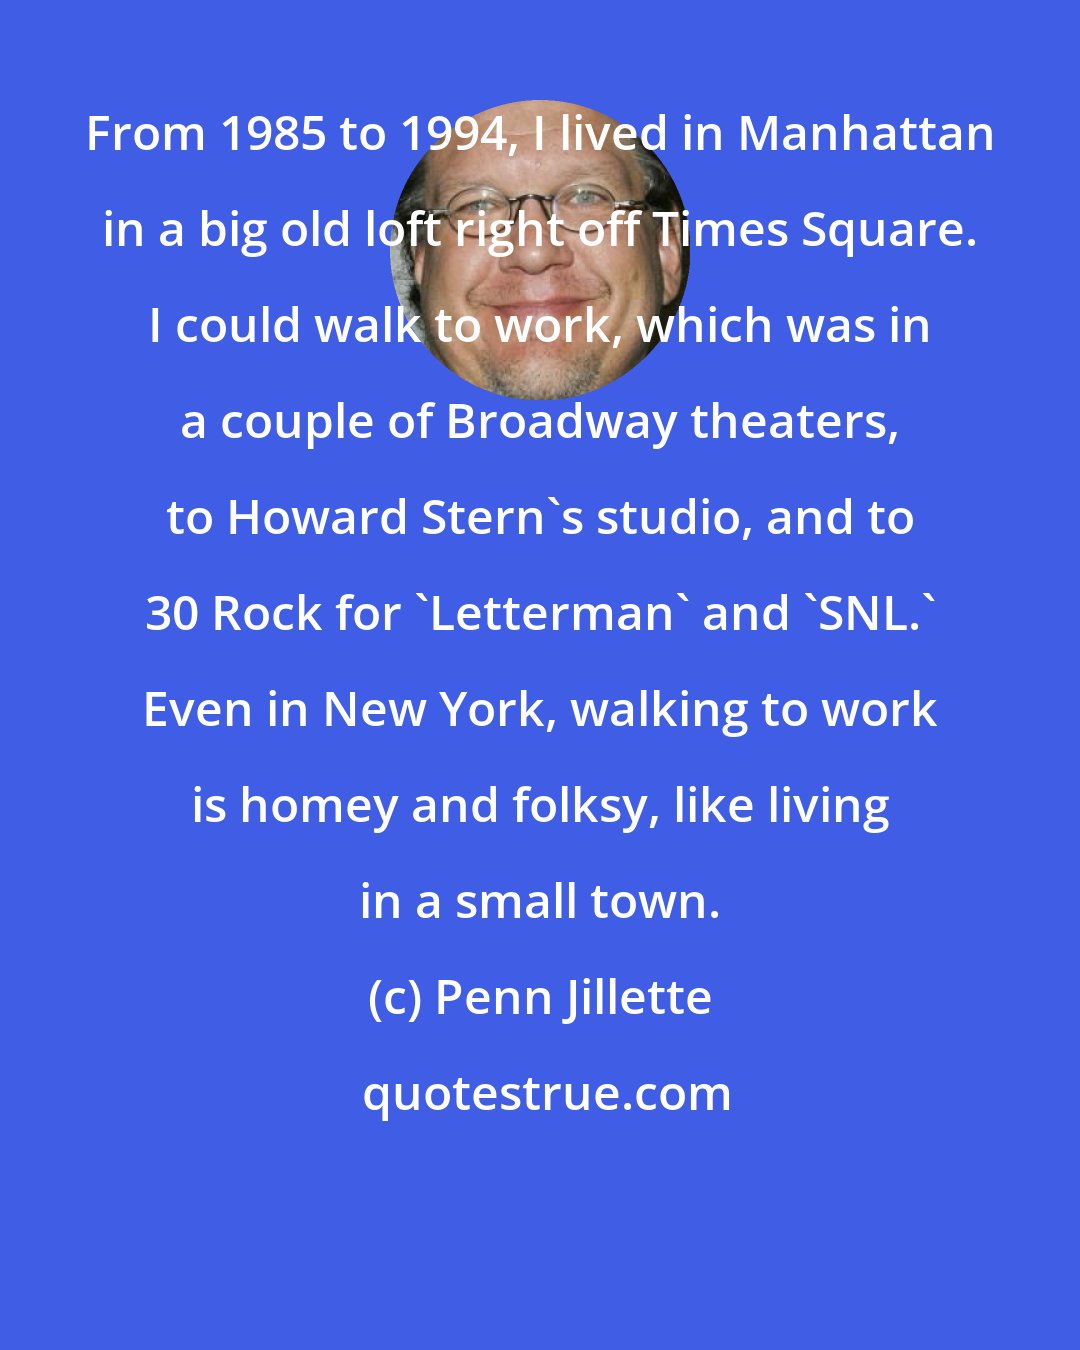 Penn Jillette: From 1985 to 1994, I lived in Manhattan in a big old loft right off Times Square. I could walk to work, which was in a couple of Broadway theaters, to Howard Stern's studio, and to 30 Rock for 'Letterman' and 'SNL.' Even in New York, walking to work is homey and folksy, like living in a small town.